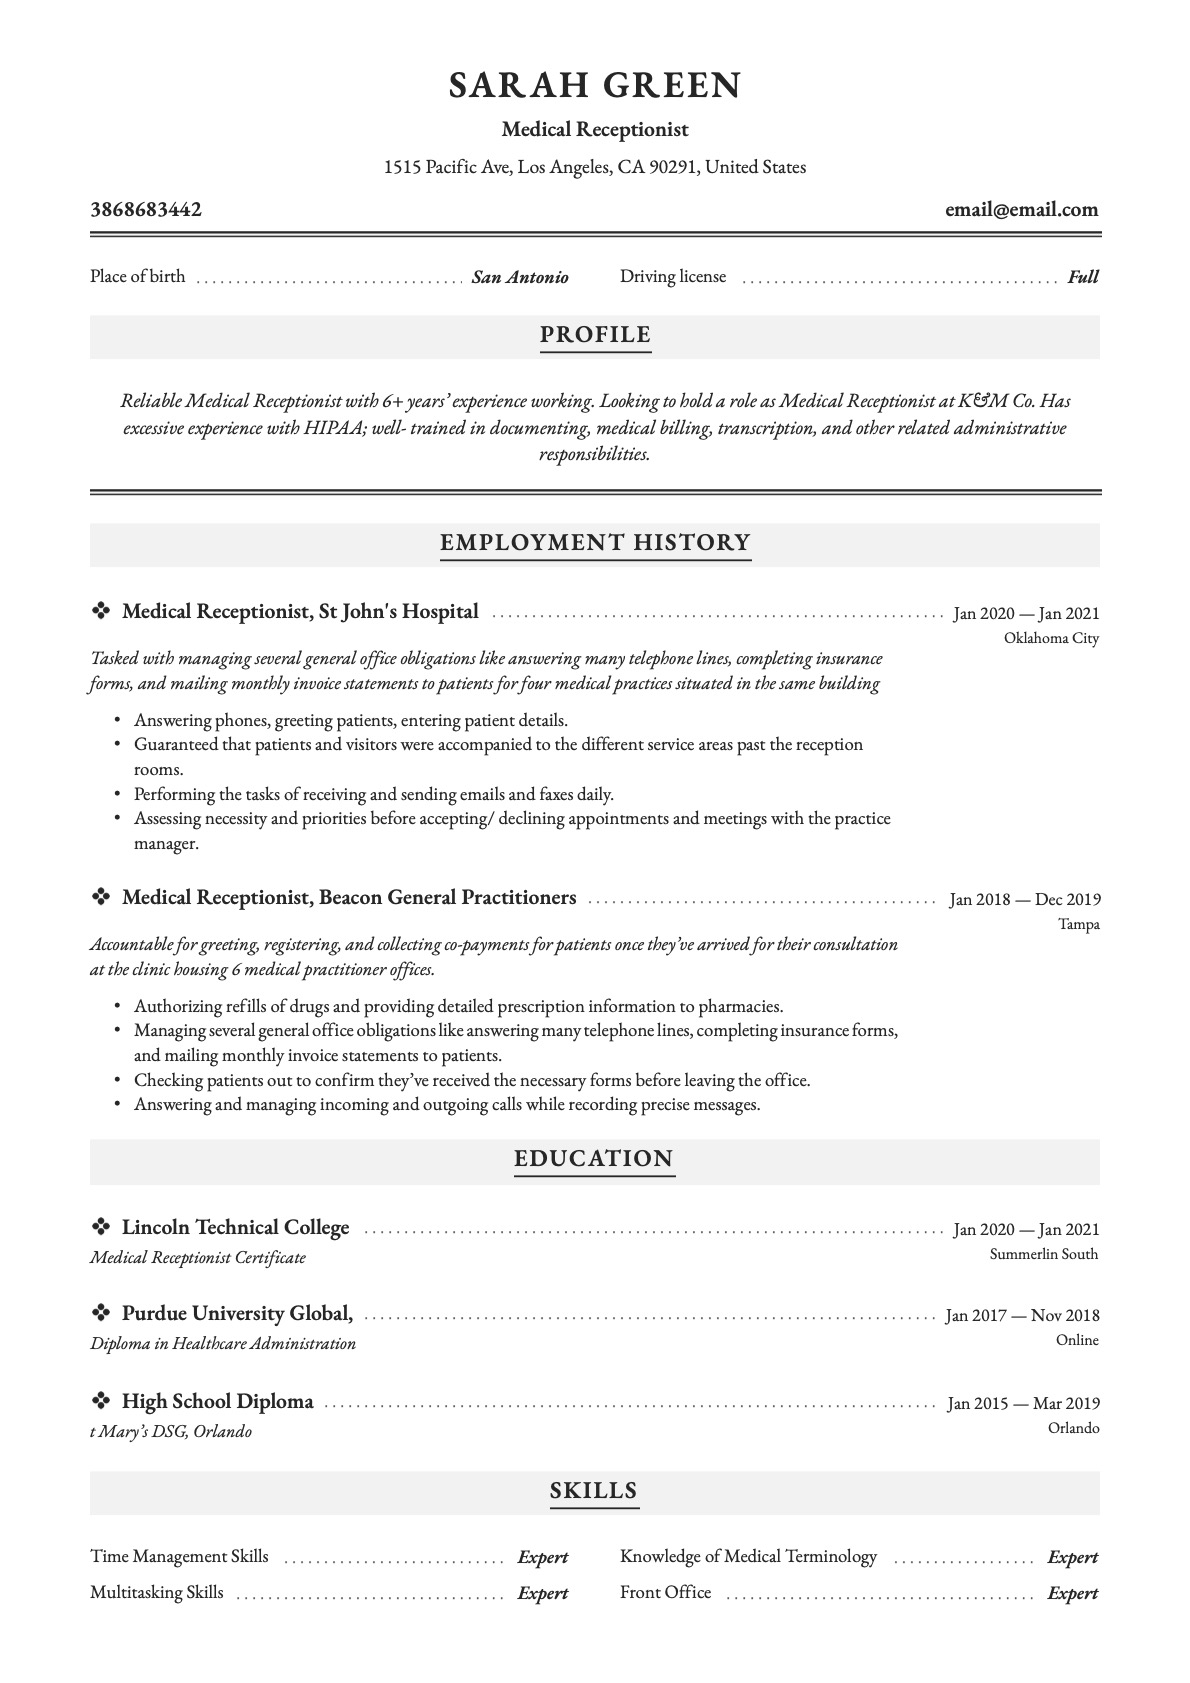 Example Resume Medical Receptionist-10